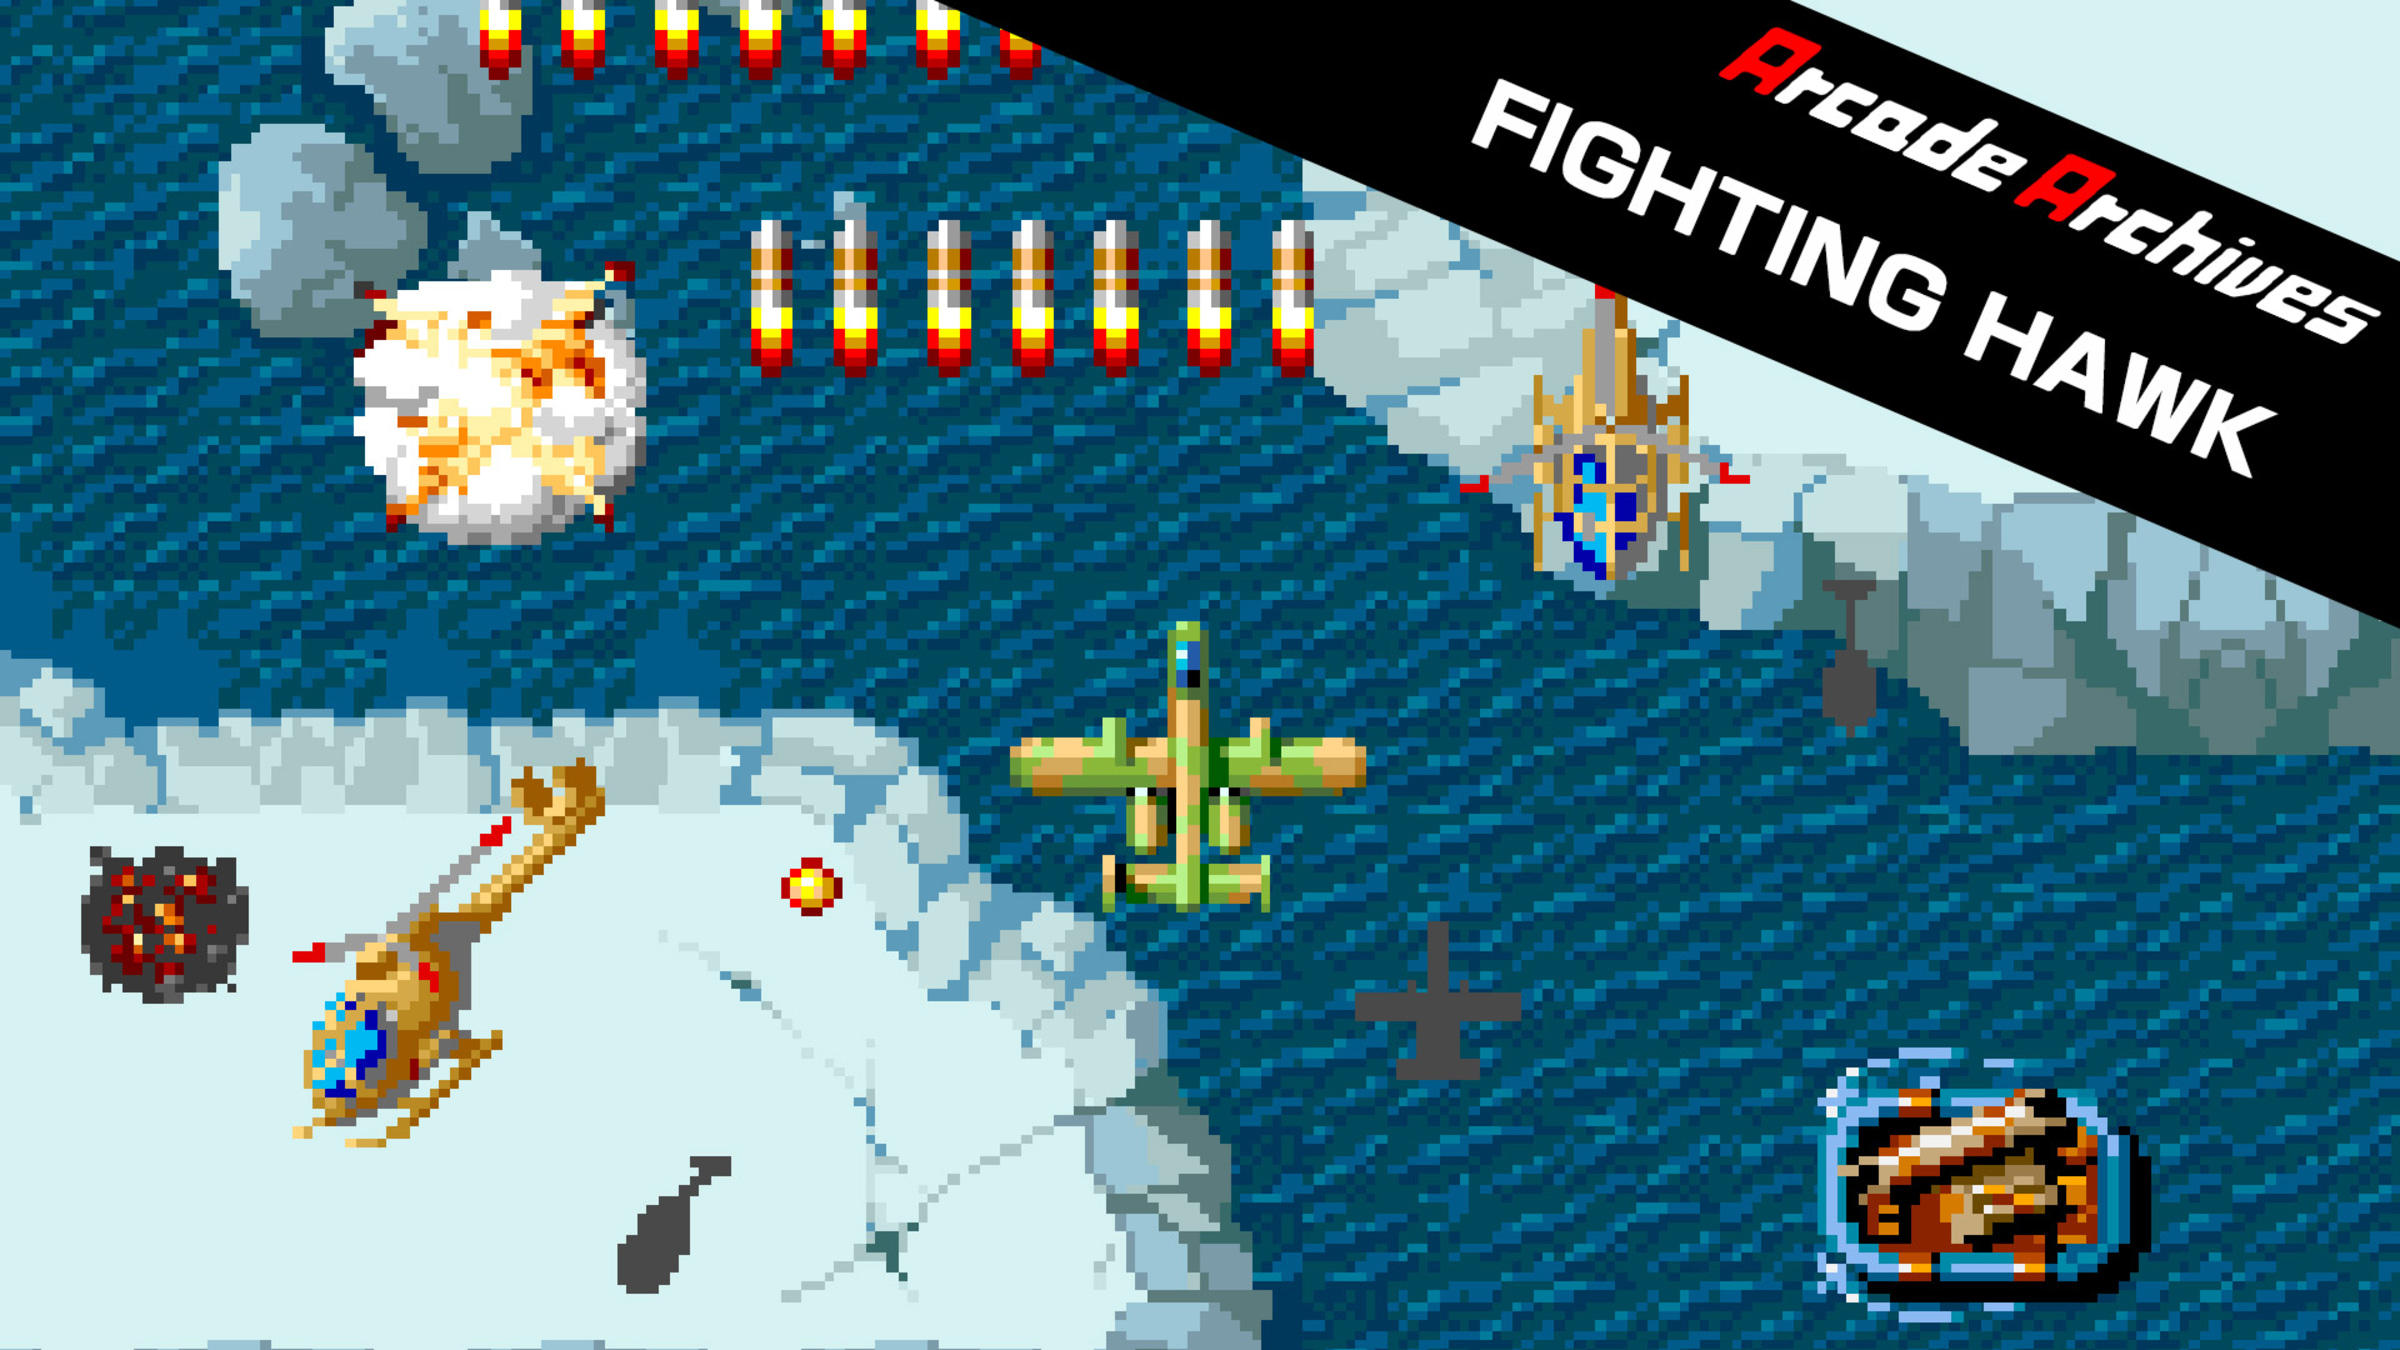 Arcade Archives FIGHTING HAWK for Nintendo Switch